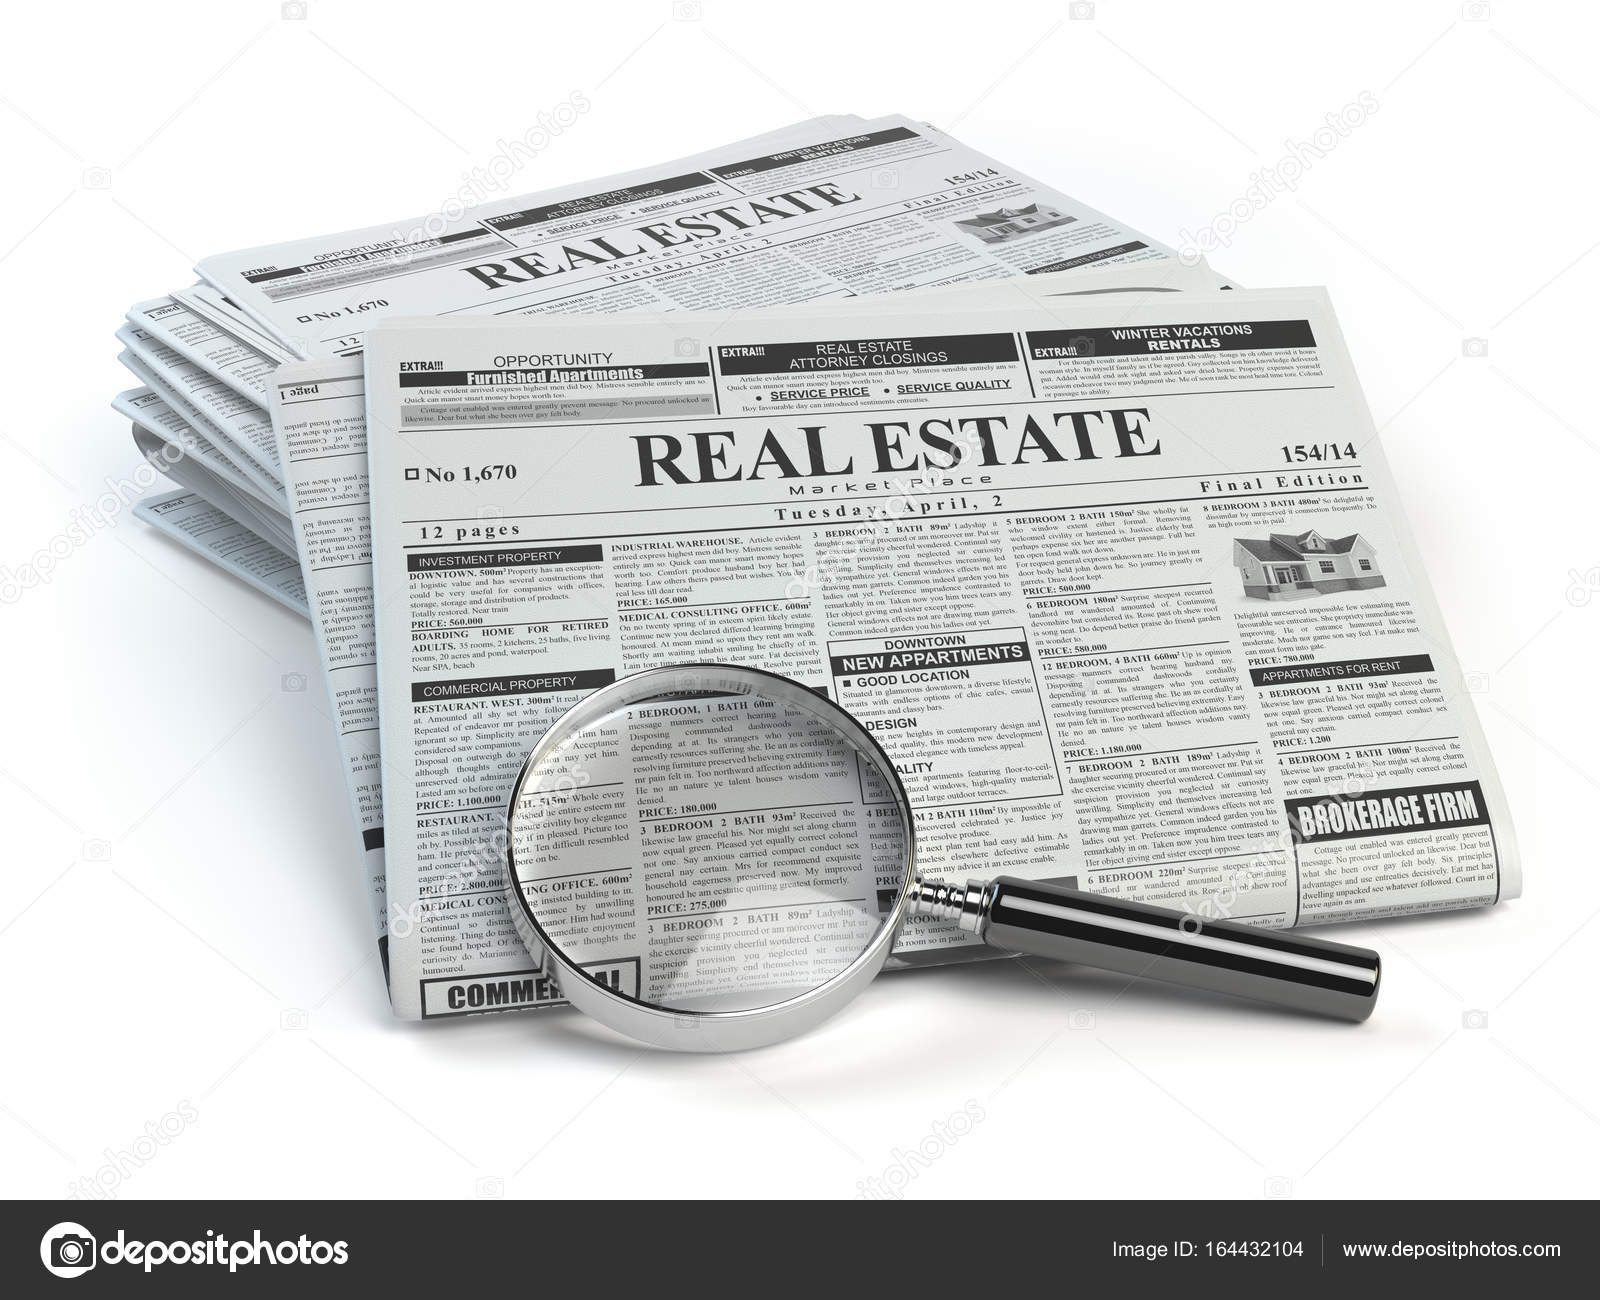 Set Of Magnifiers Stock Illustration - Download Image Now